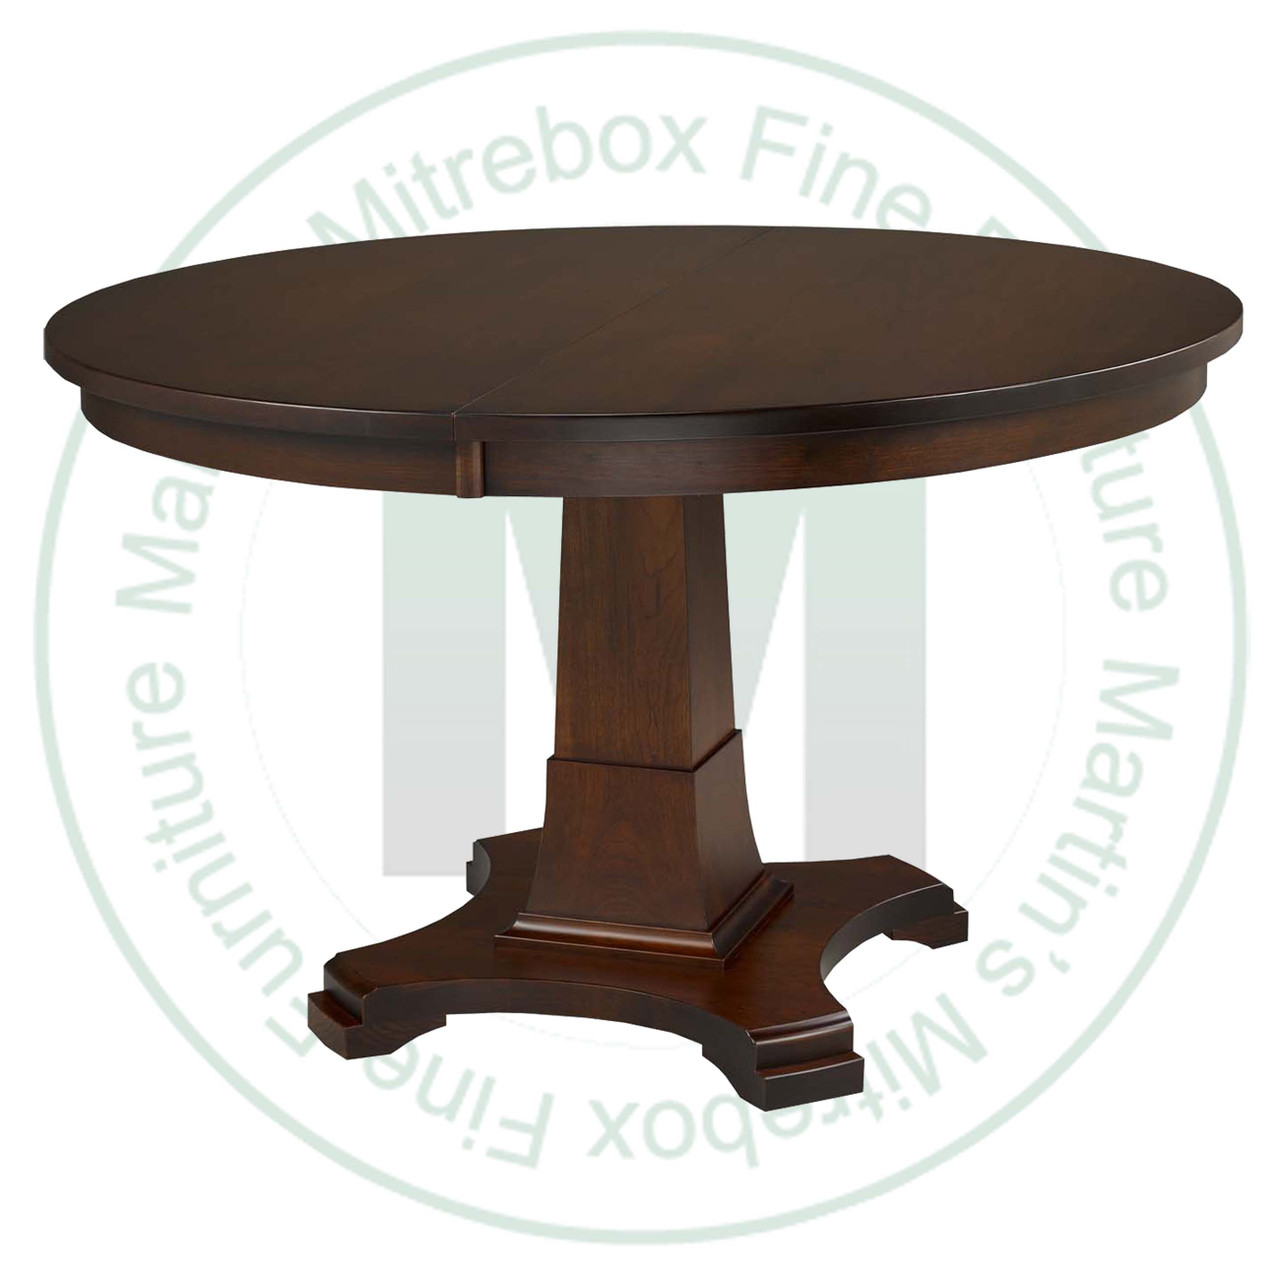 Maple Abbey Single Pedestal Table 54''D x 54''W x 30''H With 1 - 12'' Leaf. Table Has 1.25'' Thick Top